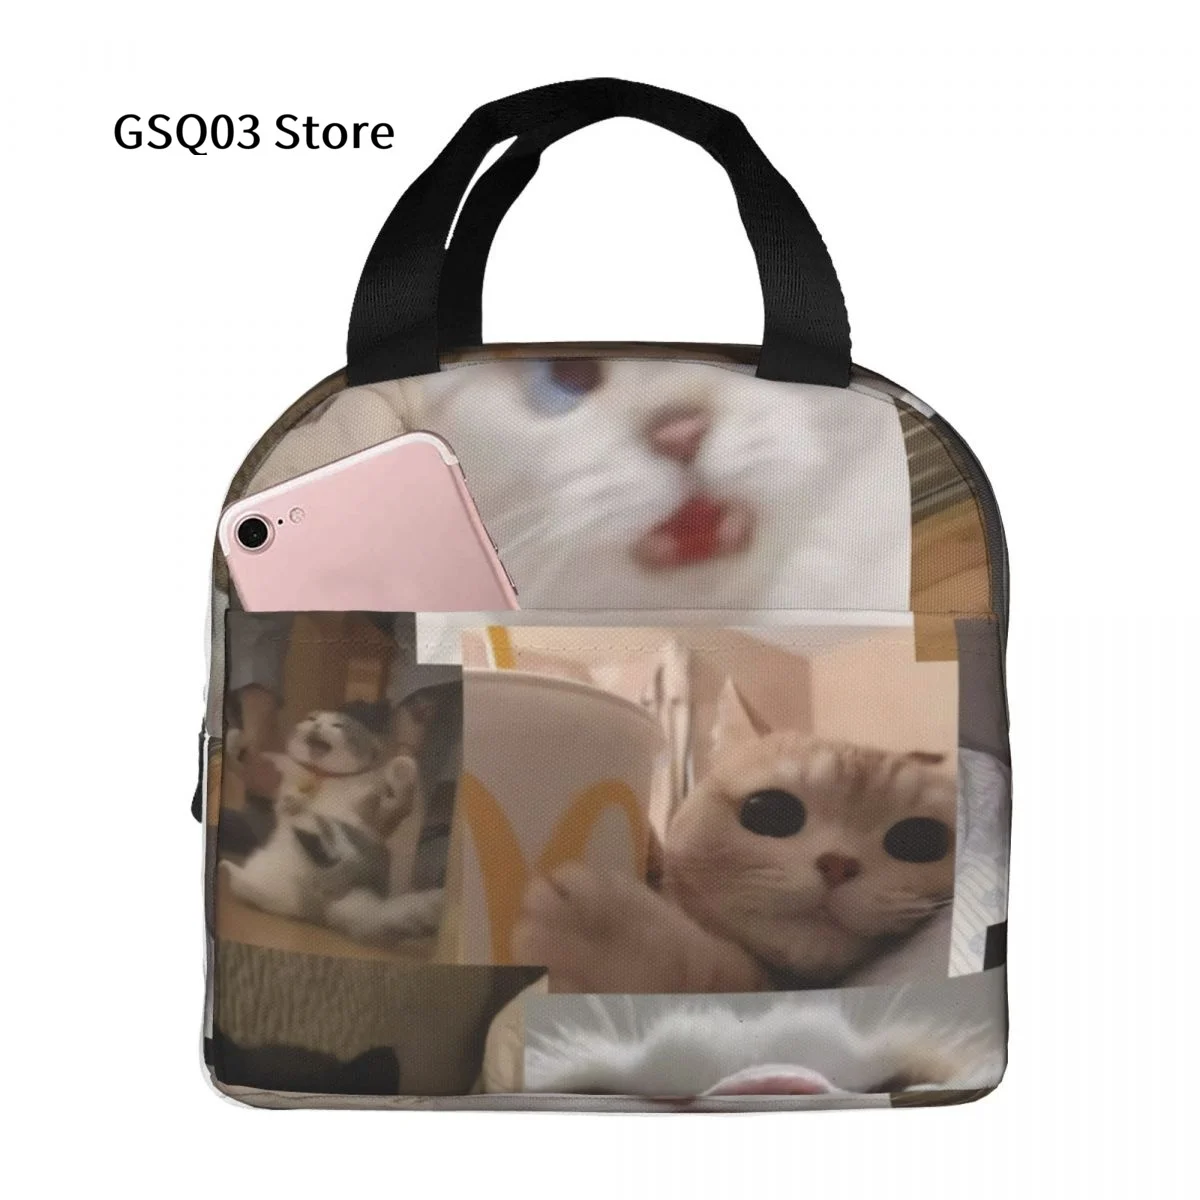 

Cat Sad Lunch Box Reusable Tote Bag, Cooler Waterproof Lunch Bag Container For Work Office Travel Picnic